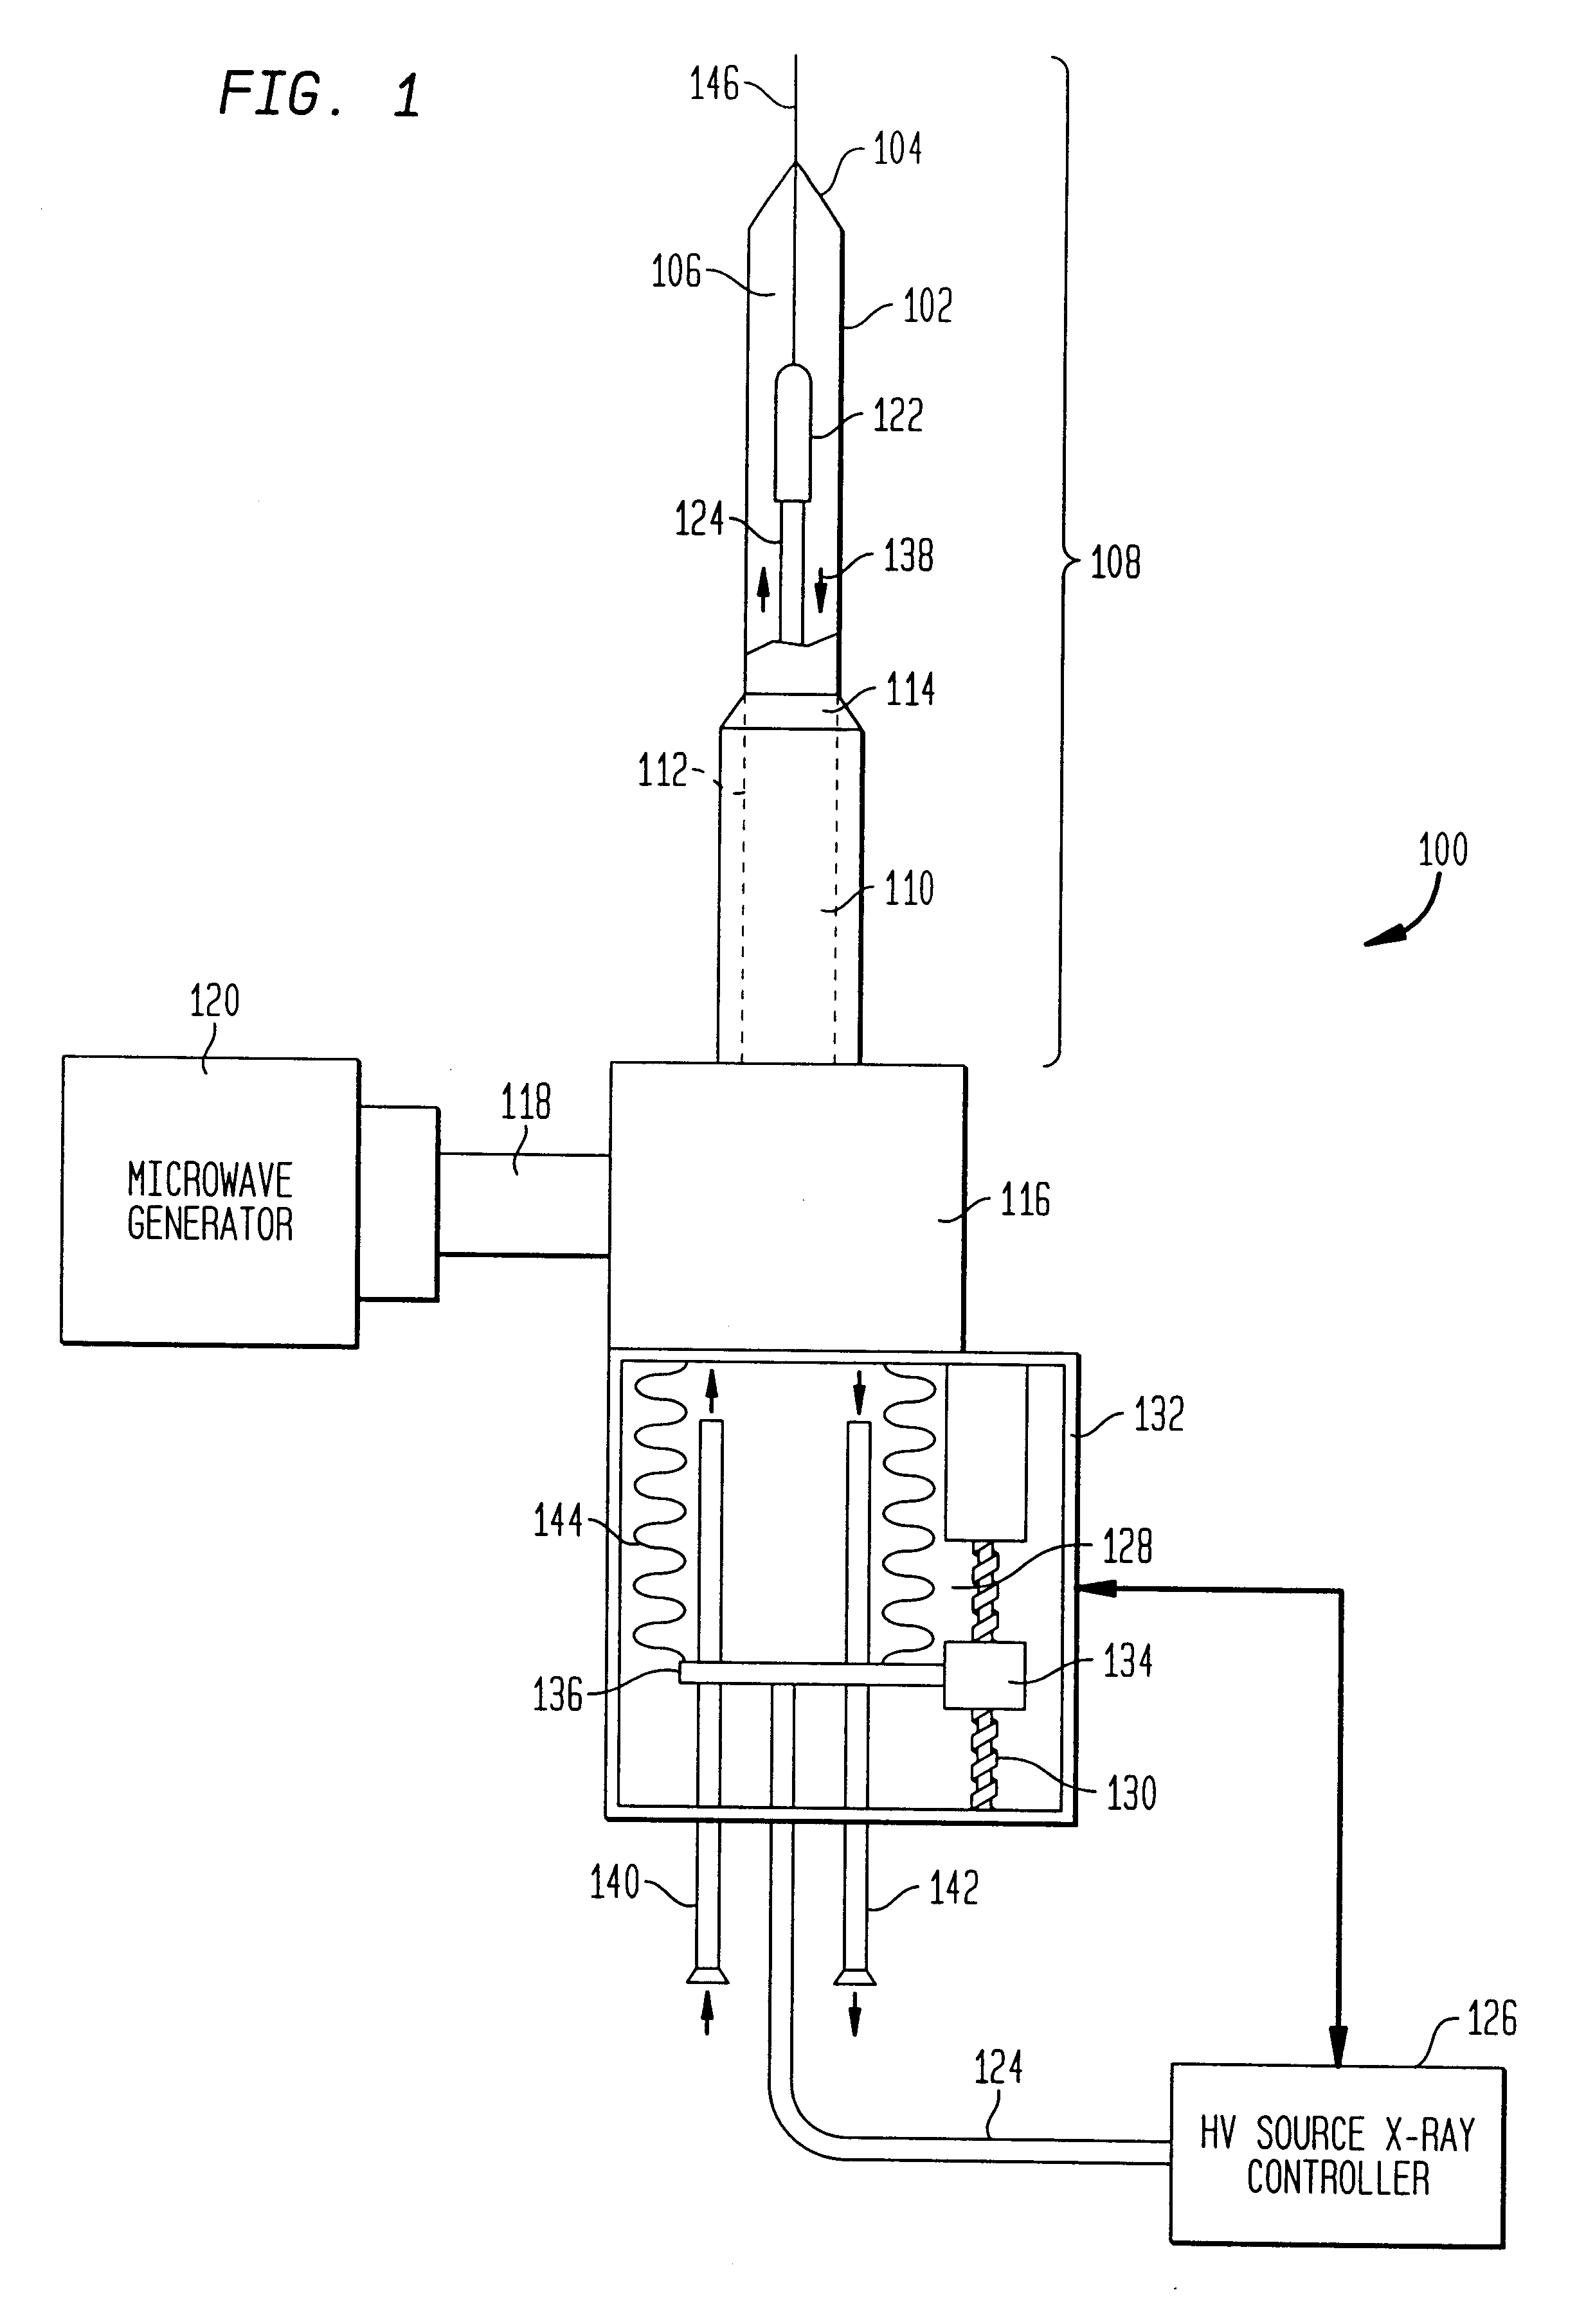 Apparatus and method for treatment of malignant tumors